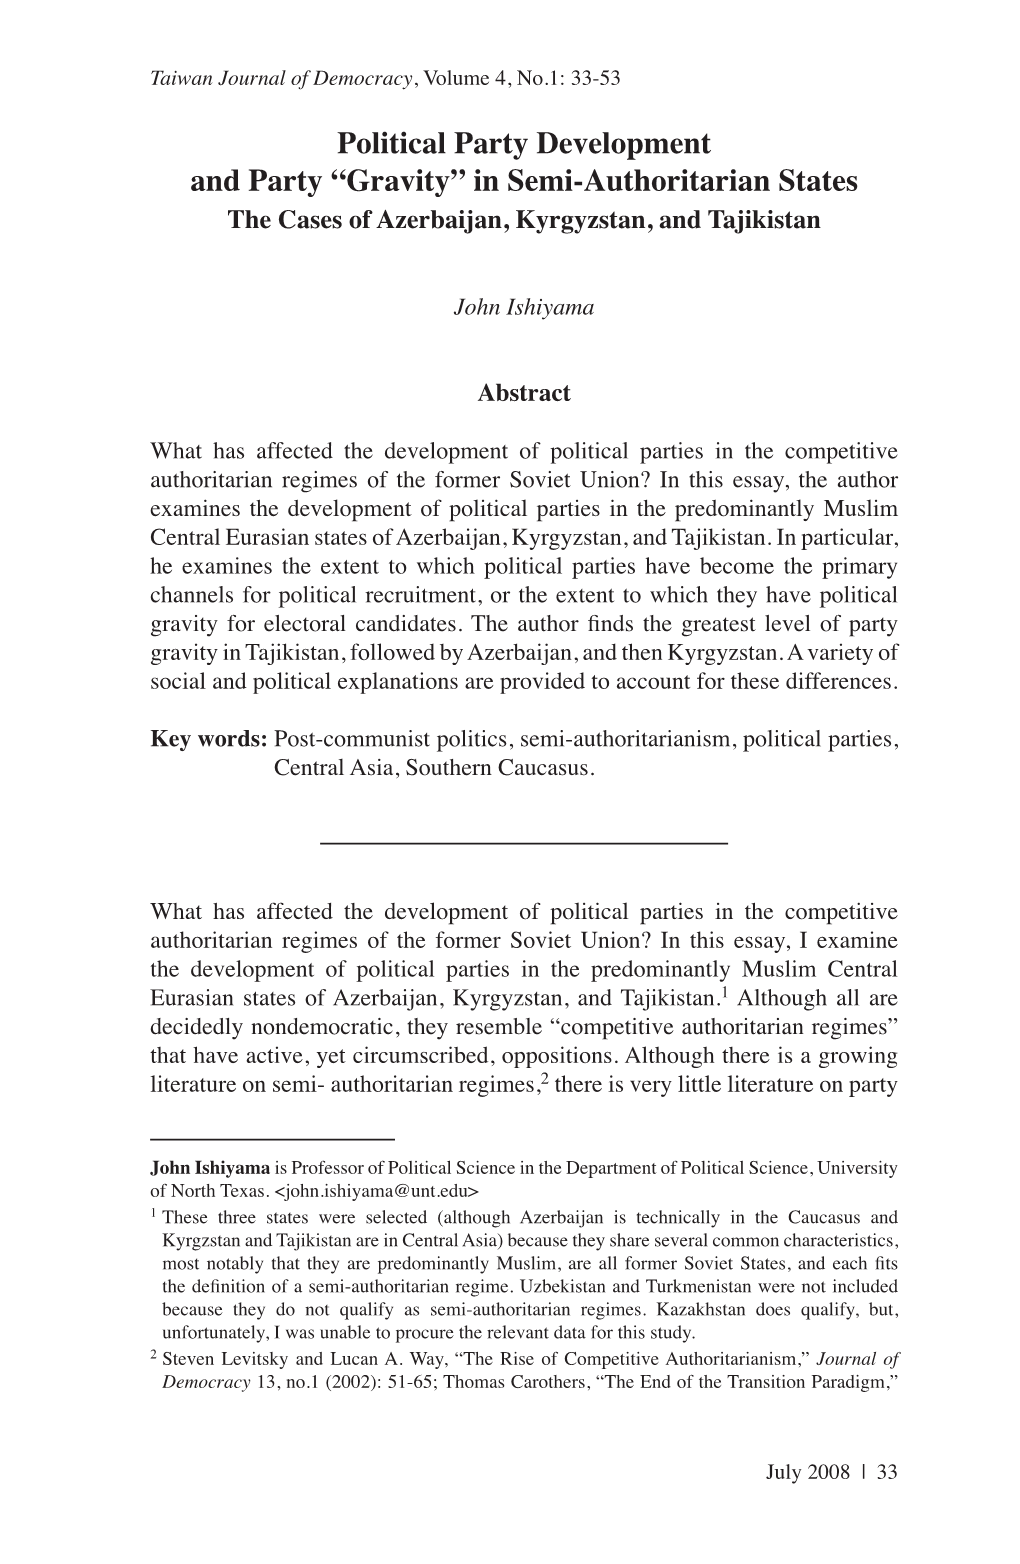 Political Party Development and Party “Gravity” in Semi-Authoritarian States the Cases of Azerbaijan, Kyrgyzstan, and Tajikistan